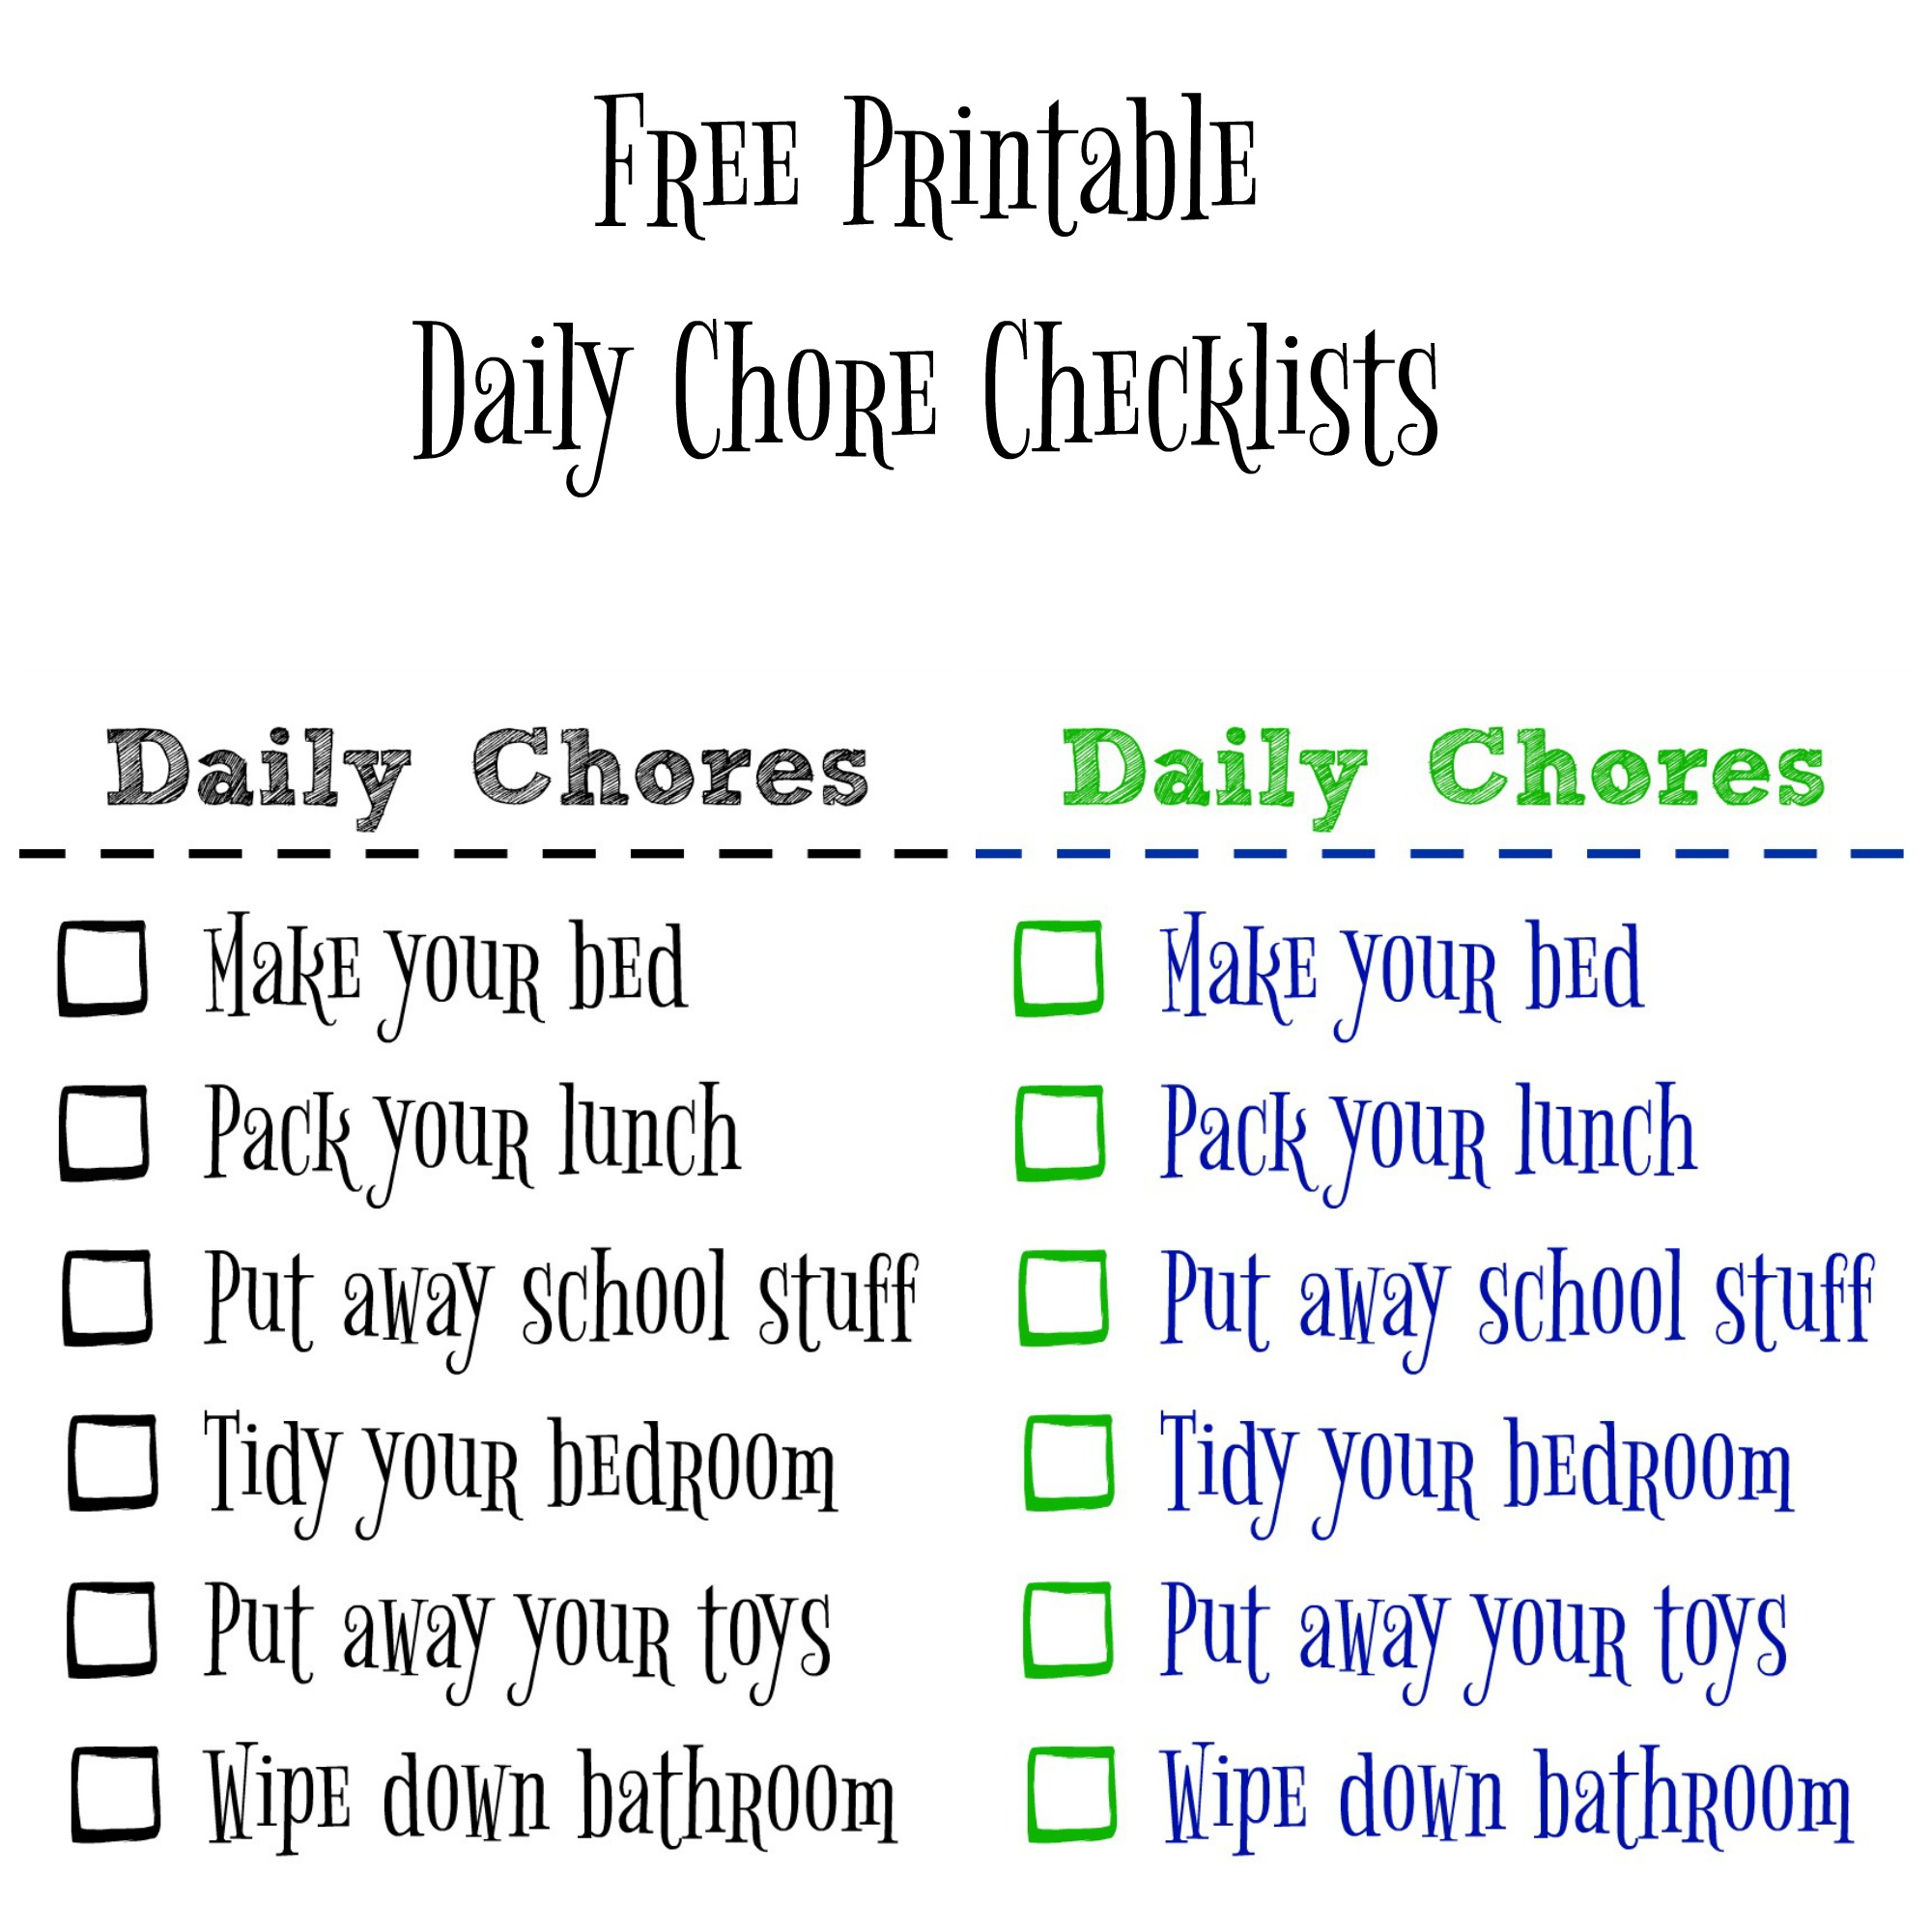 teaching-kids-to-be-clean-organized-with-a-free-printable-chore-checklist-the-happy-housie